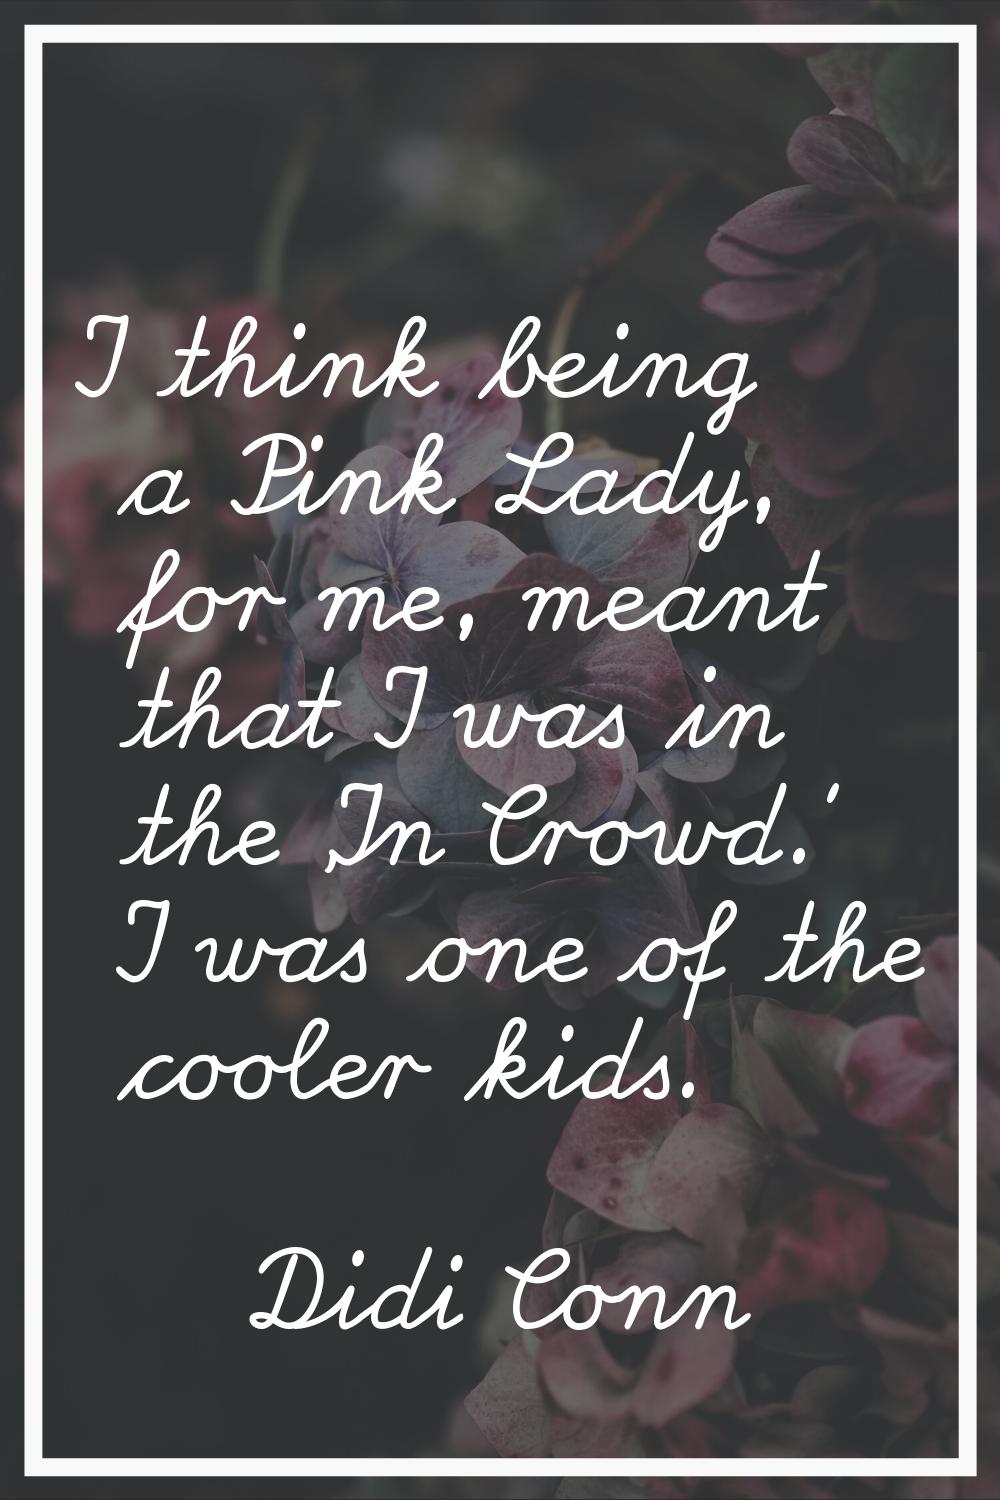 I think being a Pink Lady, for me, meant that I was in the 'In Crowd.' I was one of the cooler kids